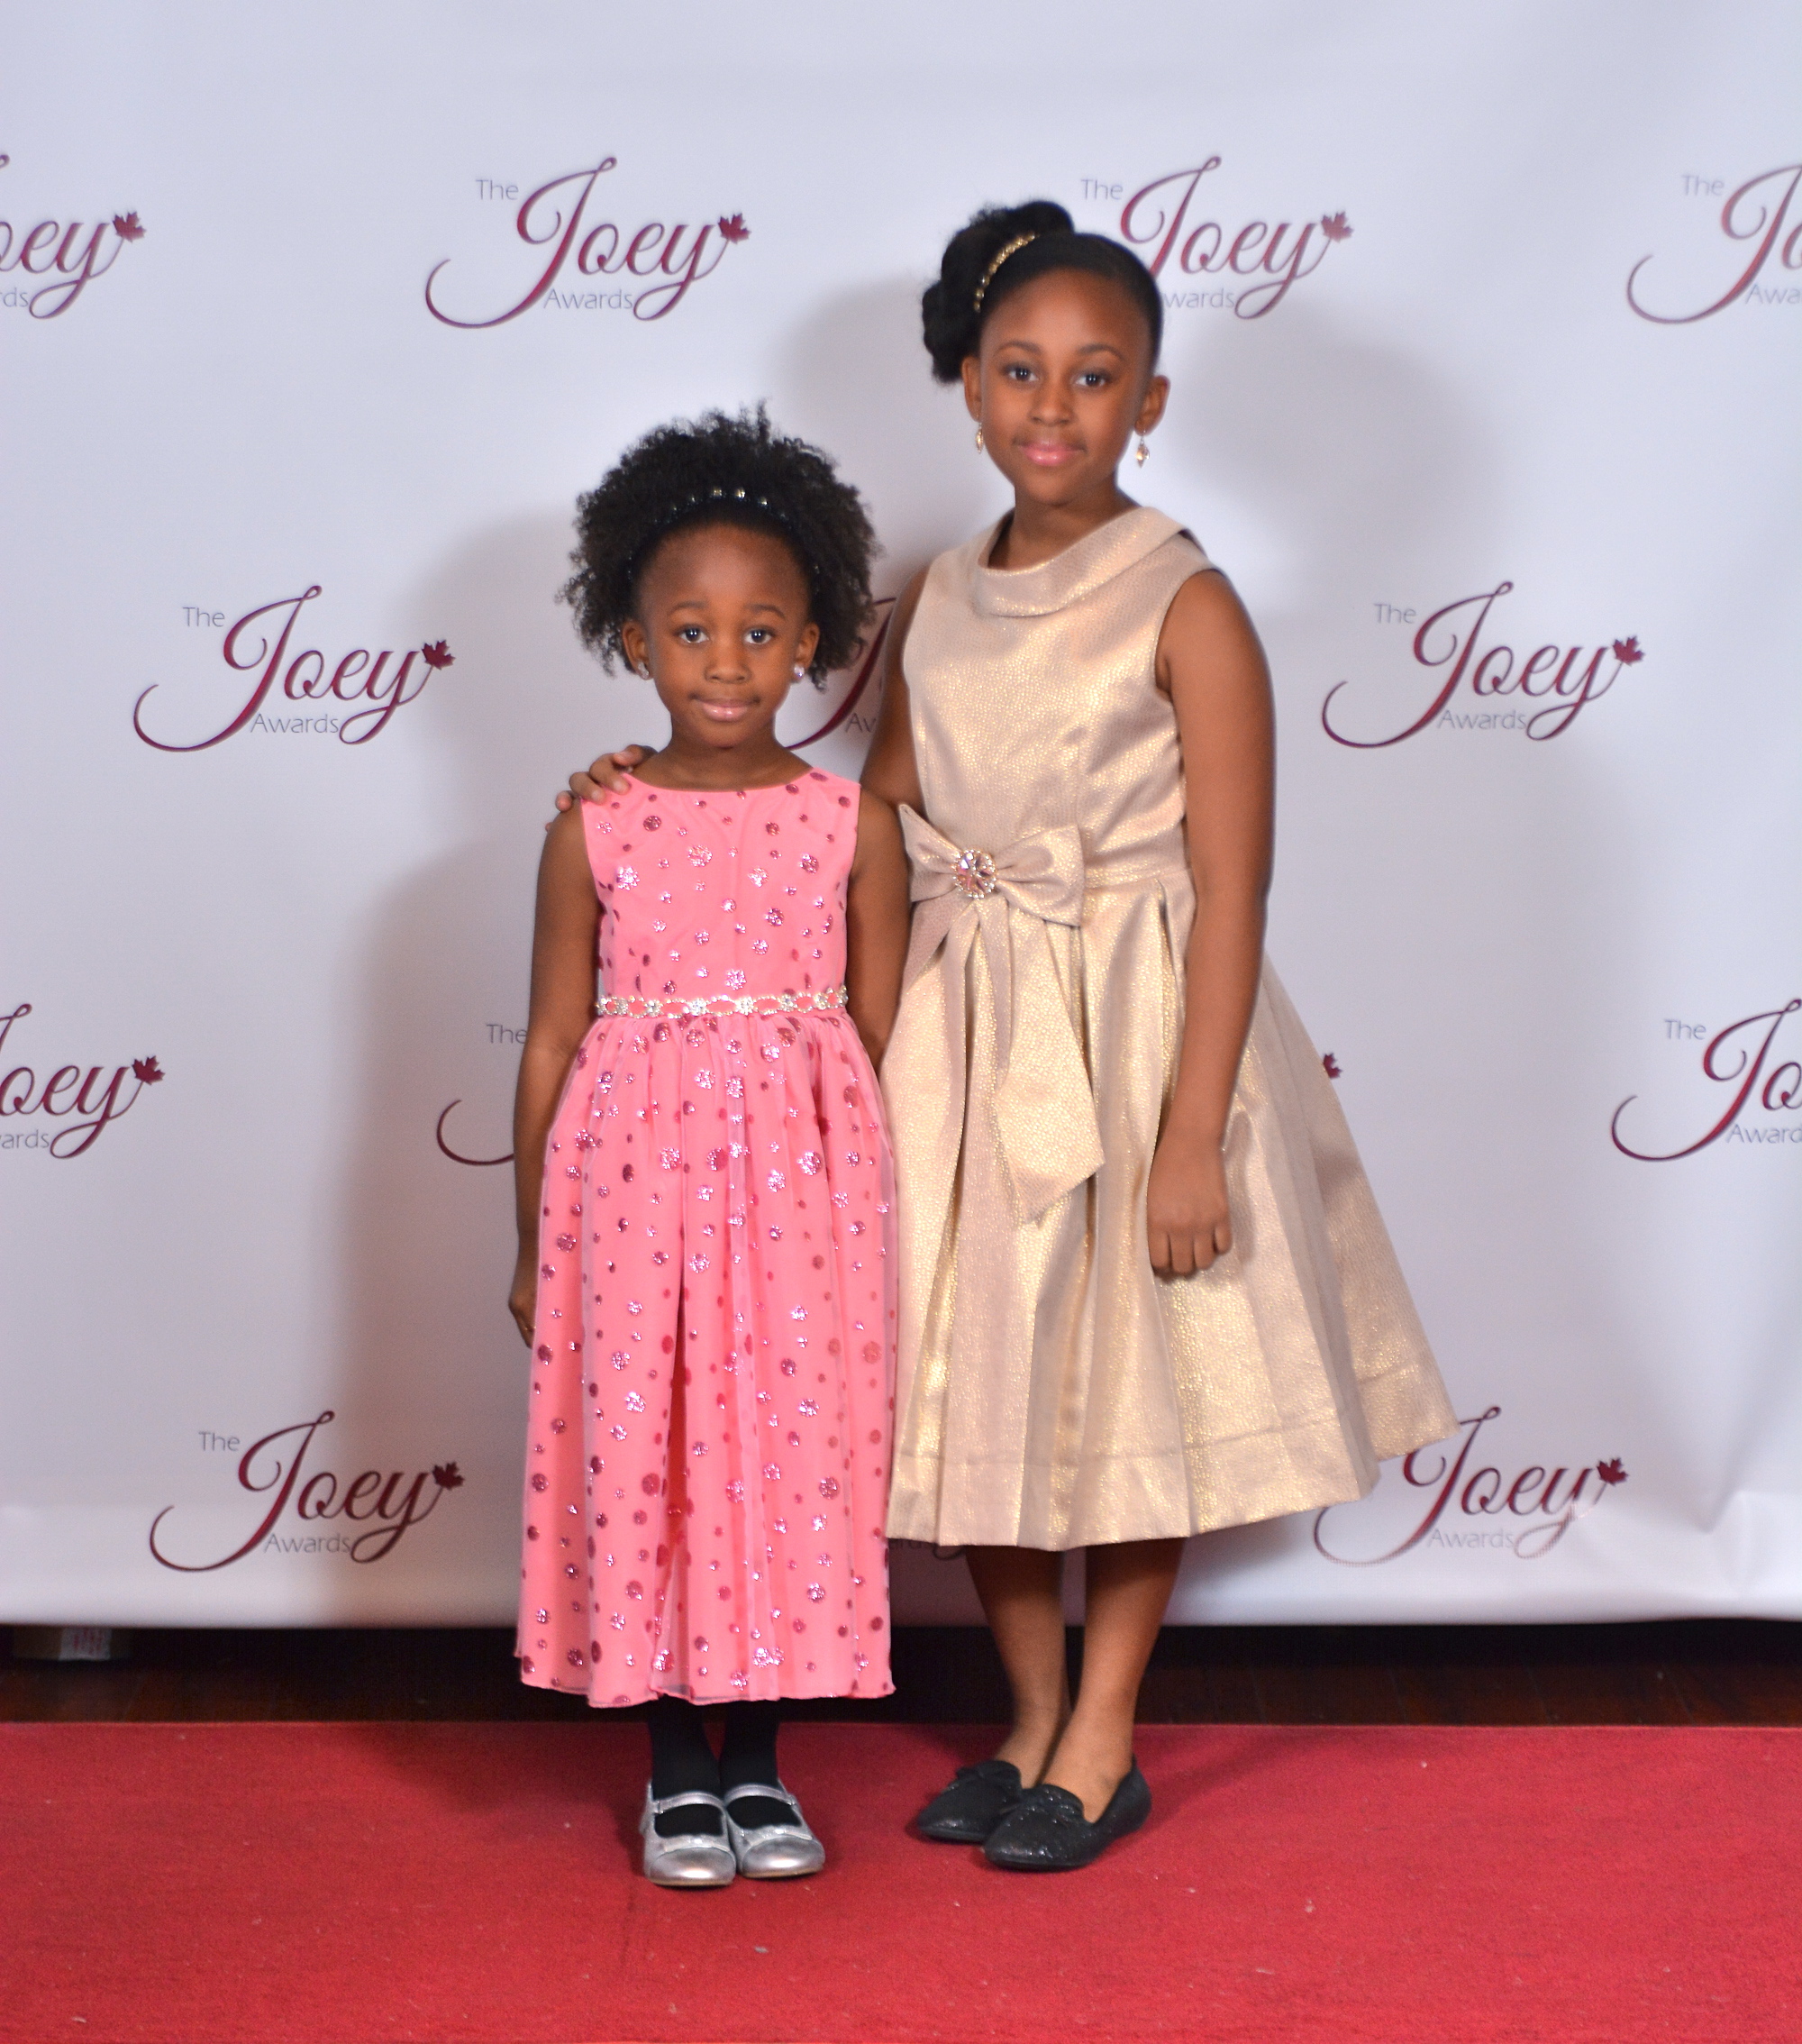 Allison with her sister Ava at the 2014 Joey Awards in Vancouver